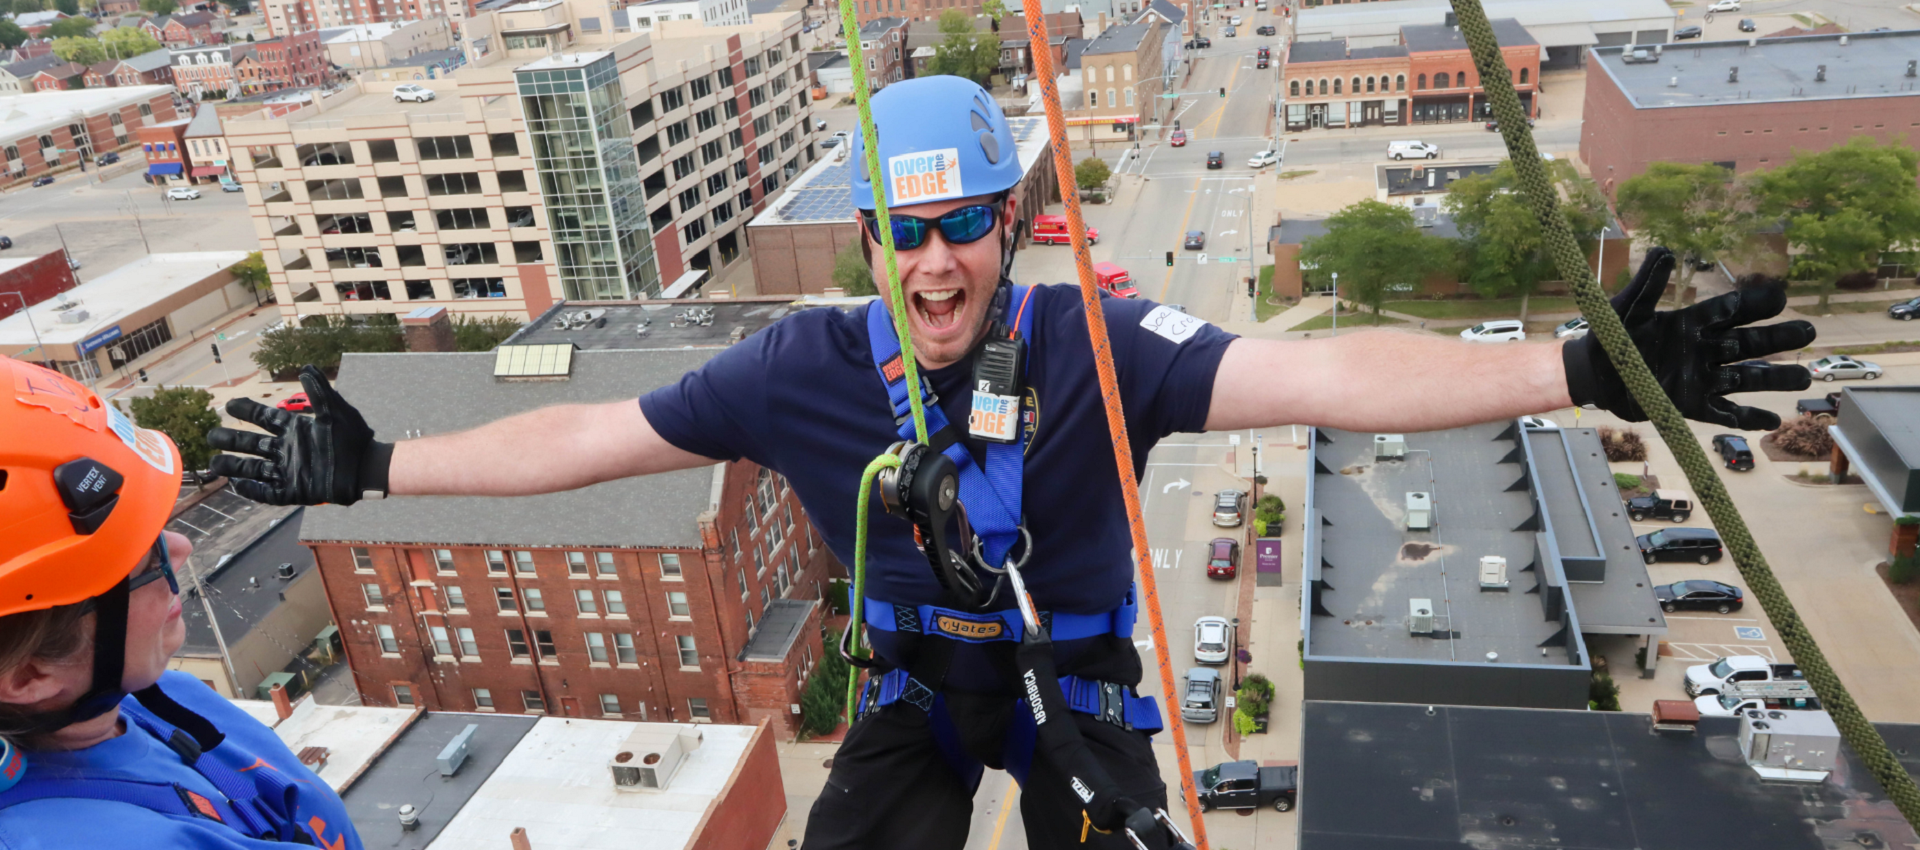 CHECK OUT WHO IS GOING OVER THE EDGE 